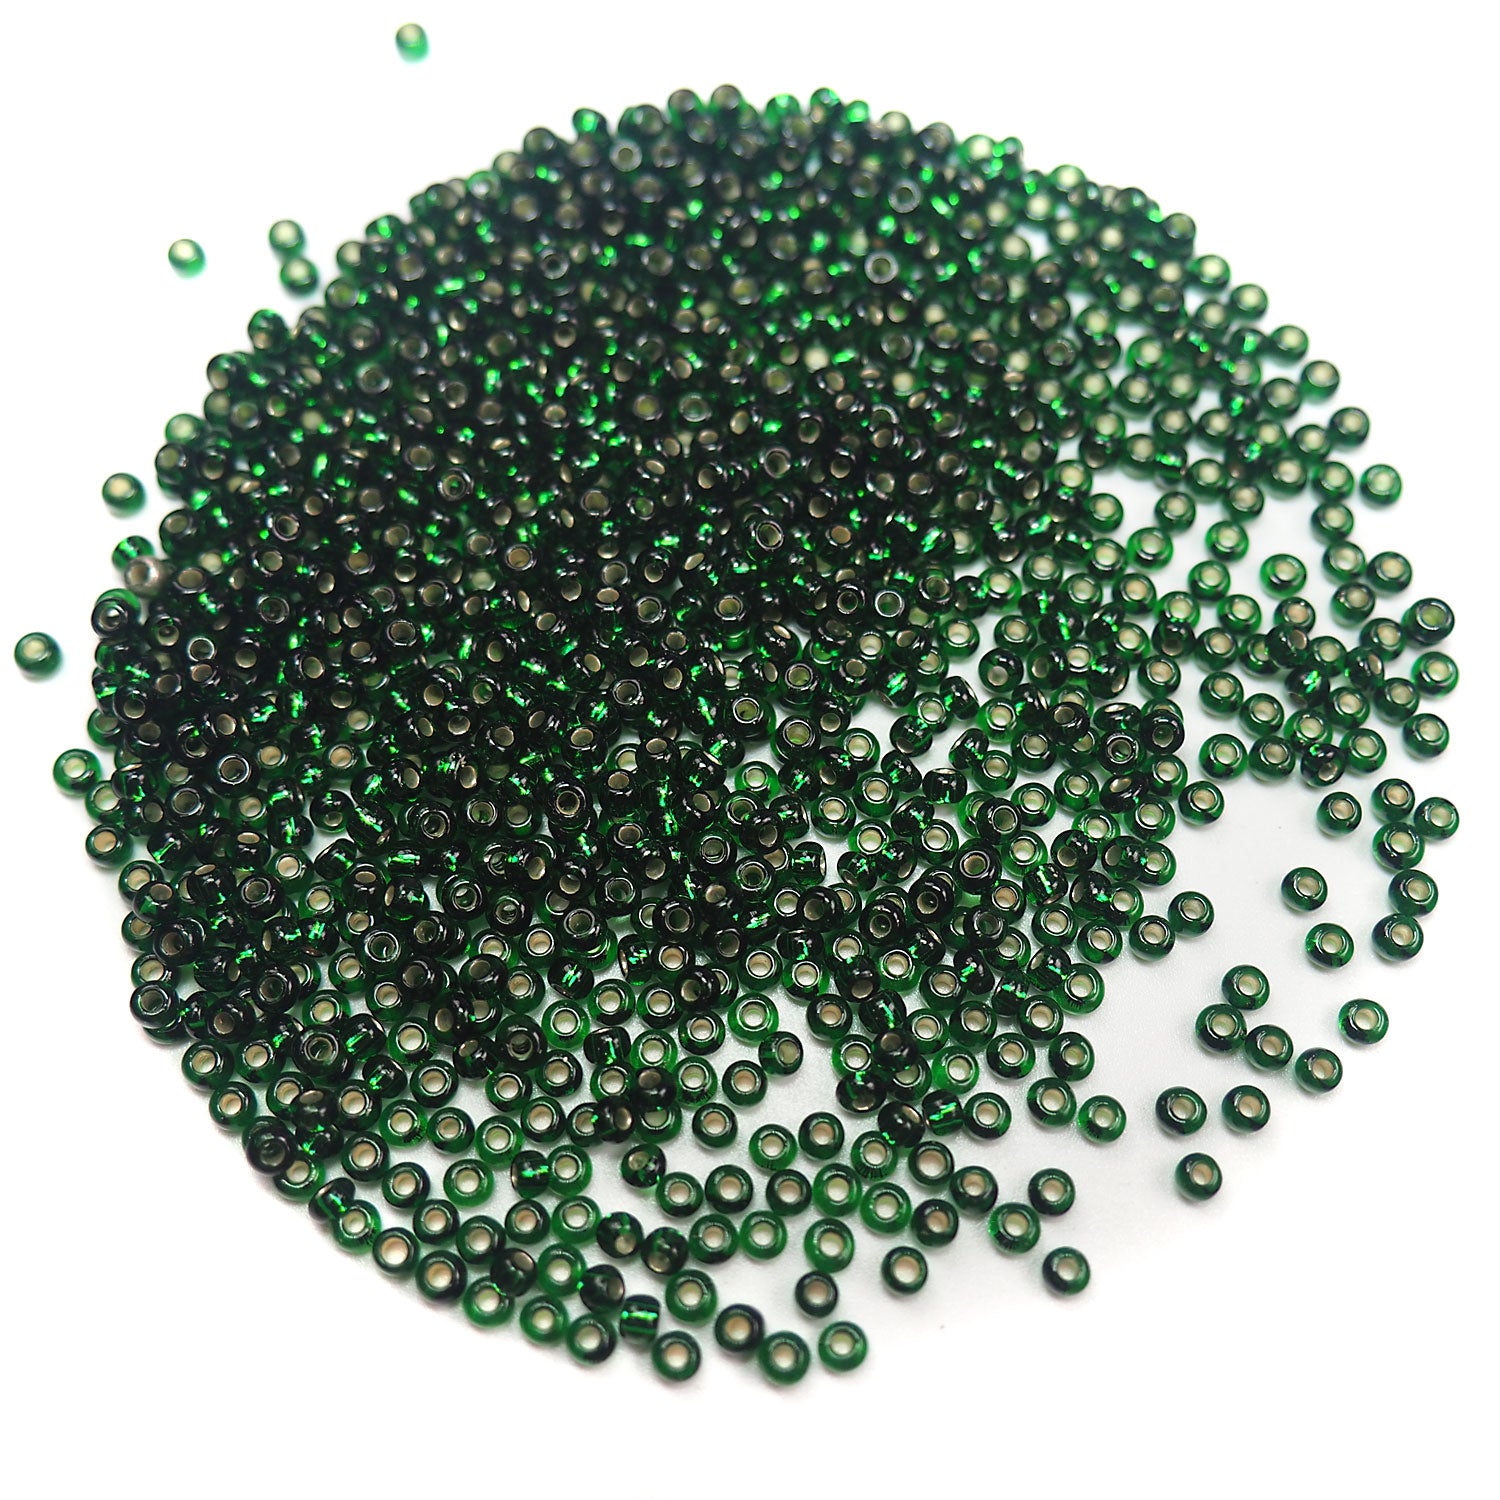 Rocailles size 9/0 (2.6mm) Dark Green Silver Lined, Preciosa Ornela Traditional Czech Glass Seed Beads, 30grams (1 oz), P942